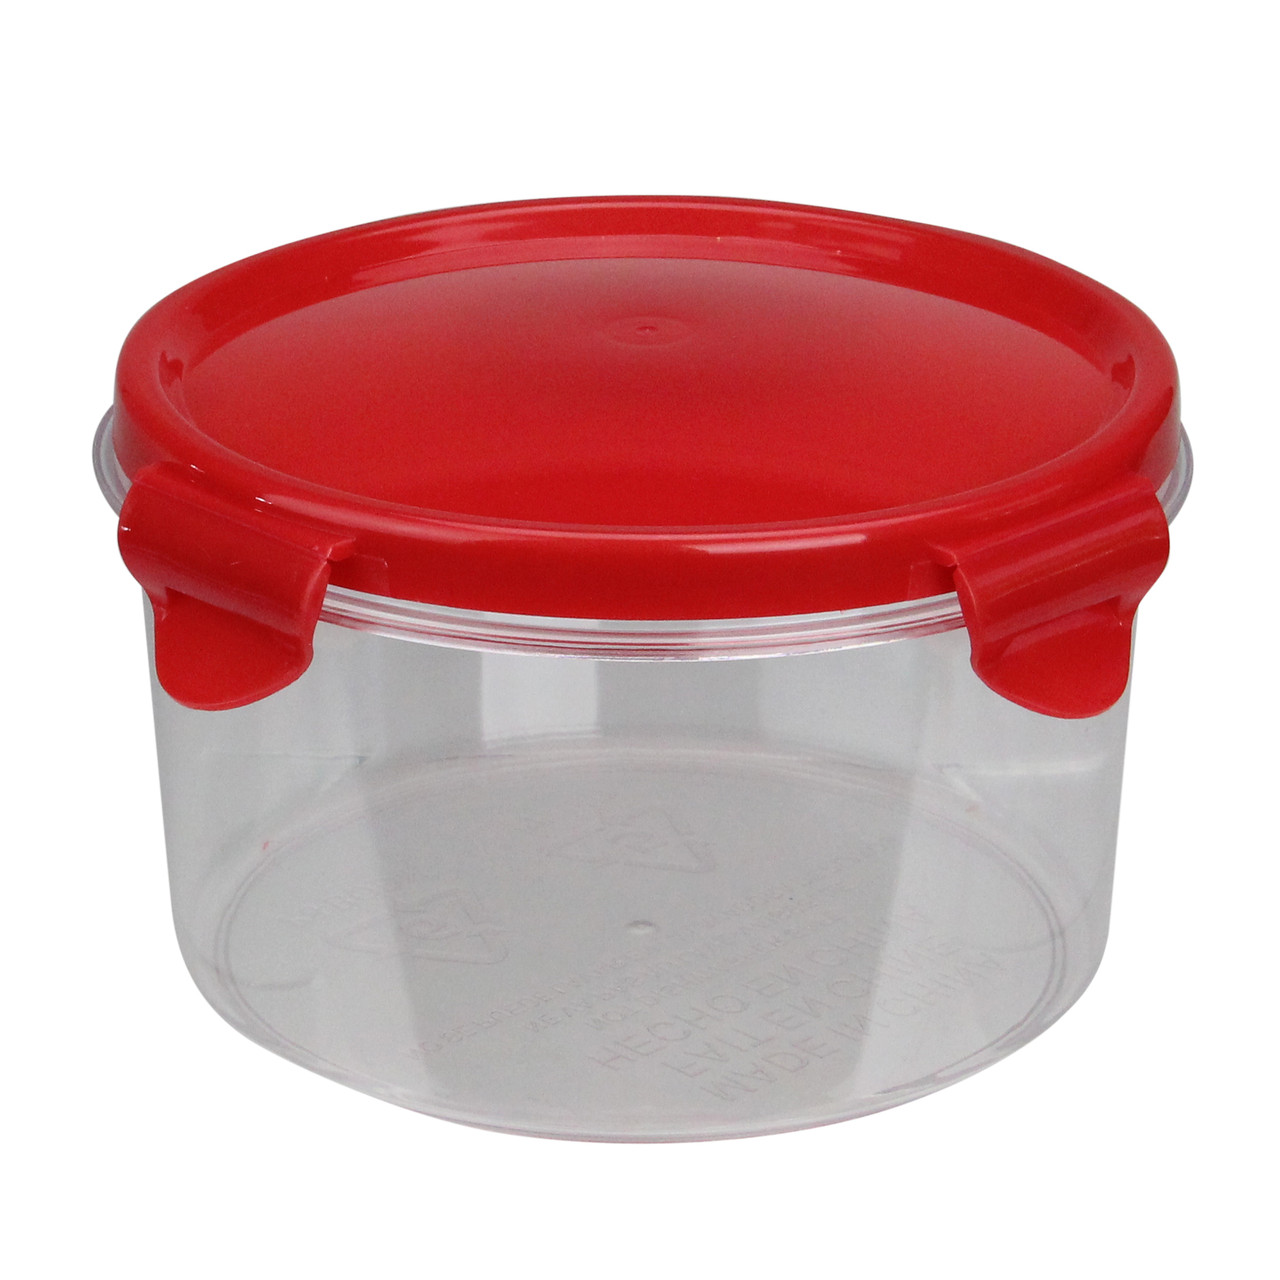 6 Resealable Sugar Storage Container with Attached Lid